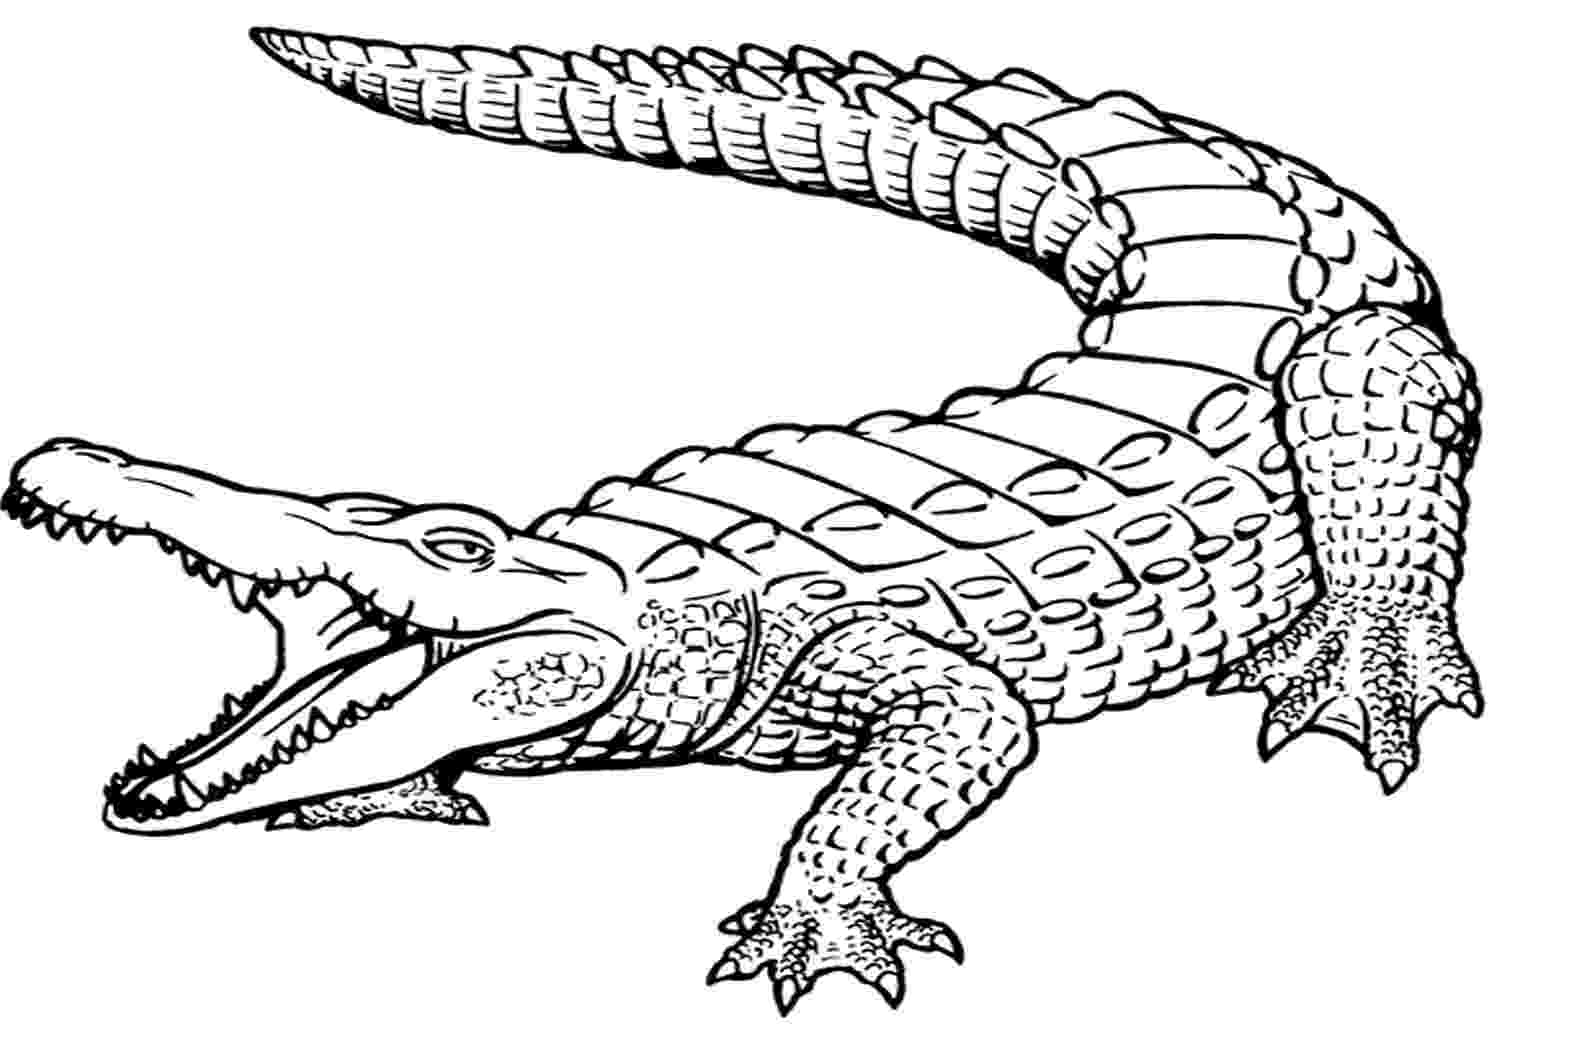 picture of a crocodile to colour crocodile coloring pages to print crocodile picture to a of colour 